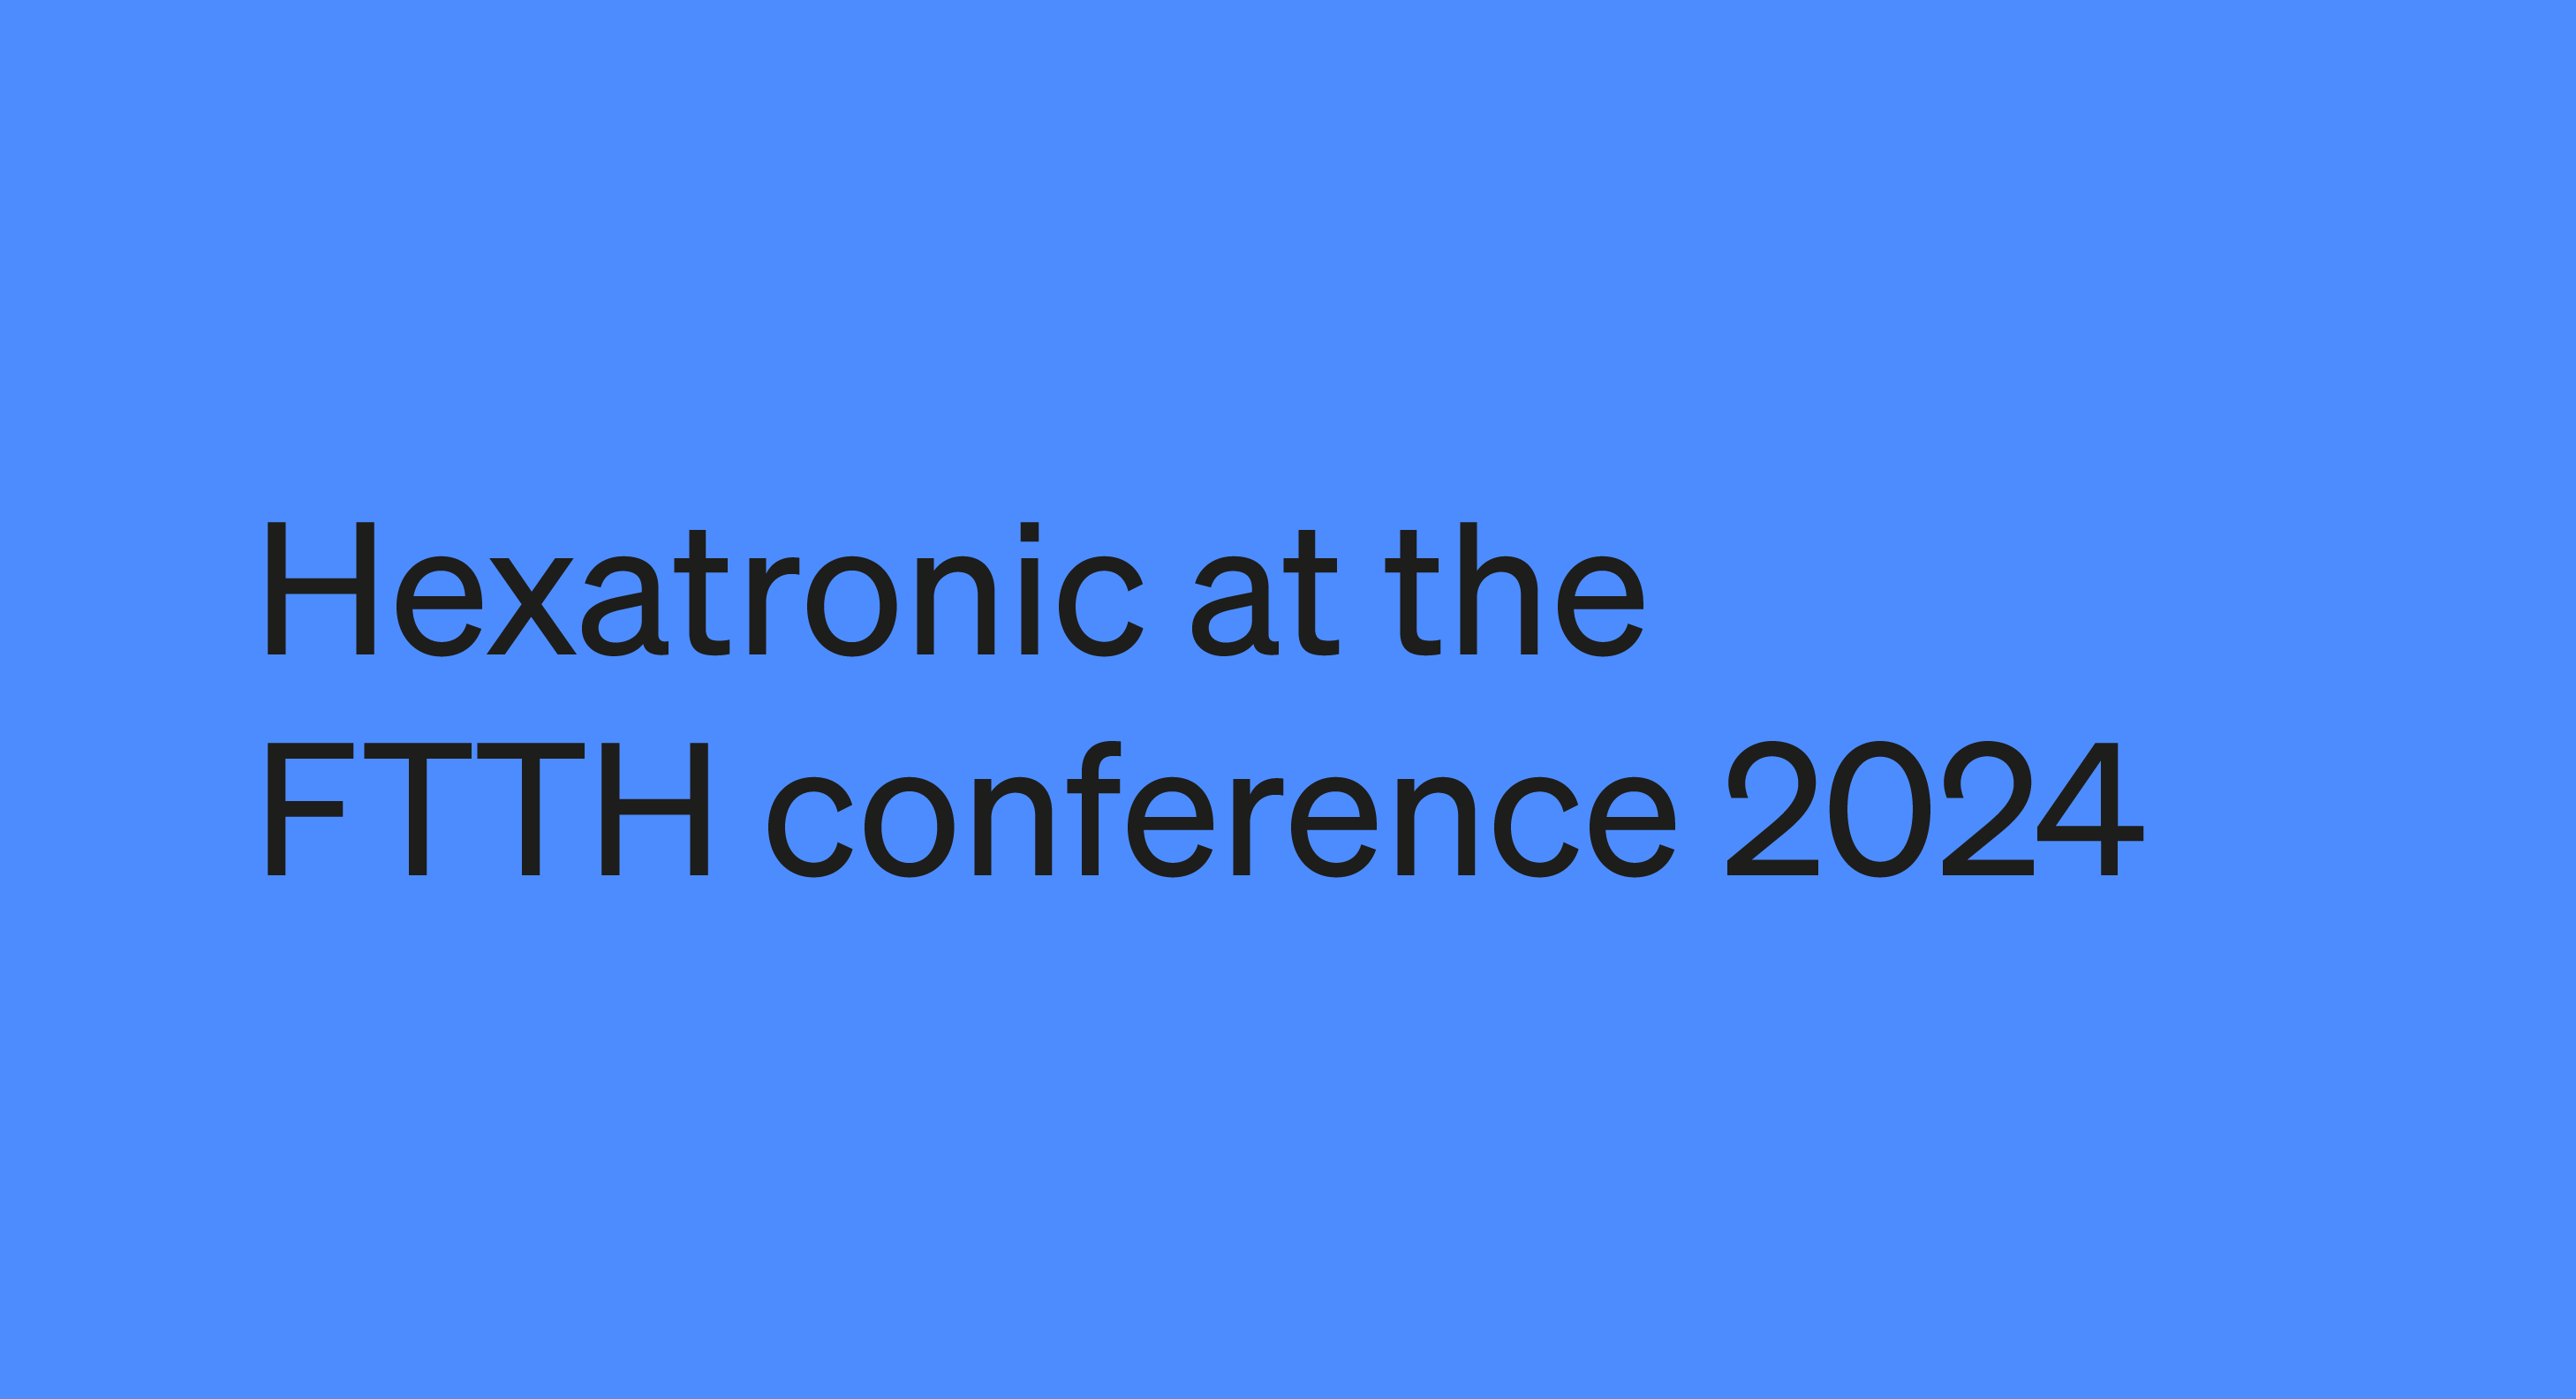 FTTH conference 2024